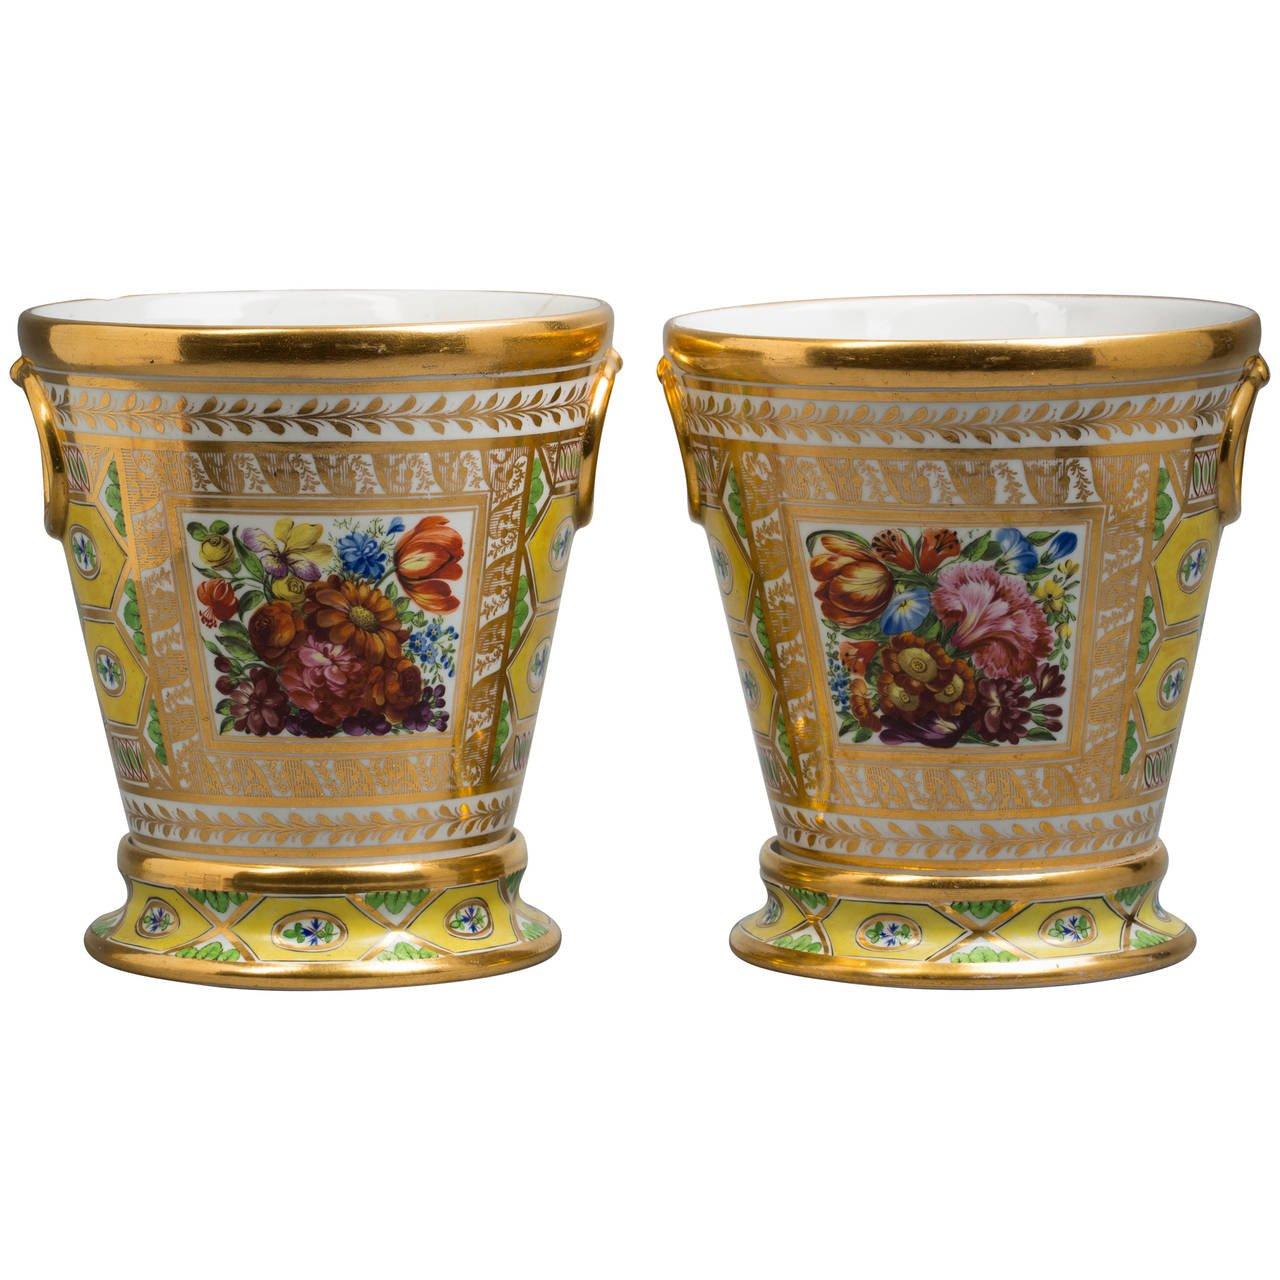 19th Century Pair of English Porcelain Cachepots on Stands, Coalport, circa 1820 For Sale